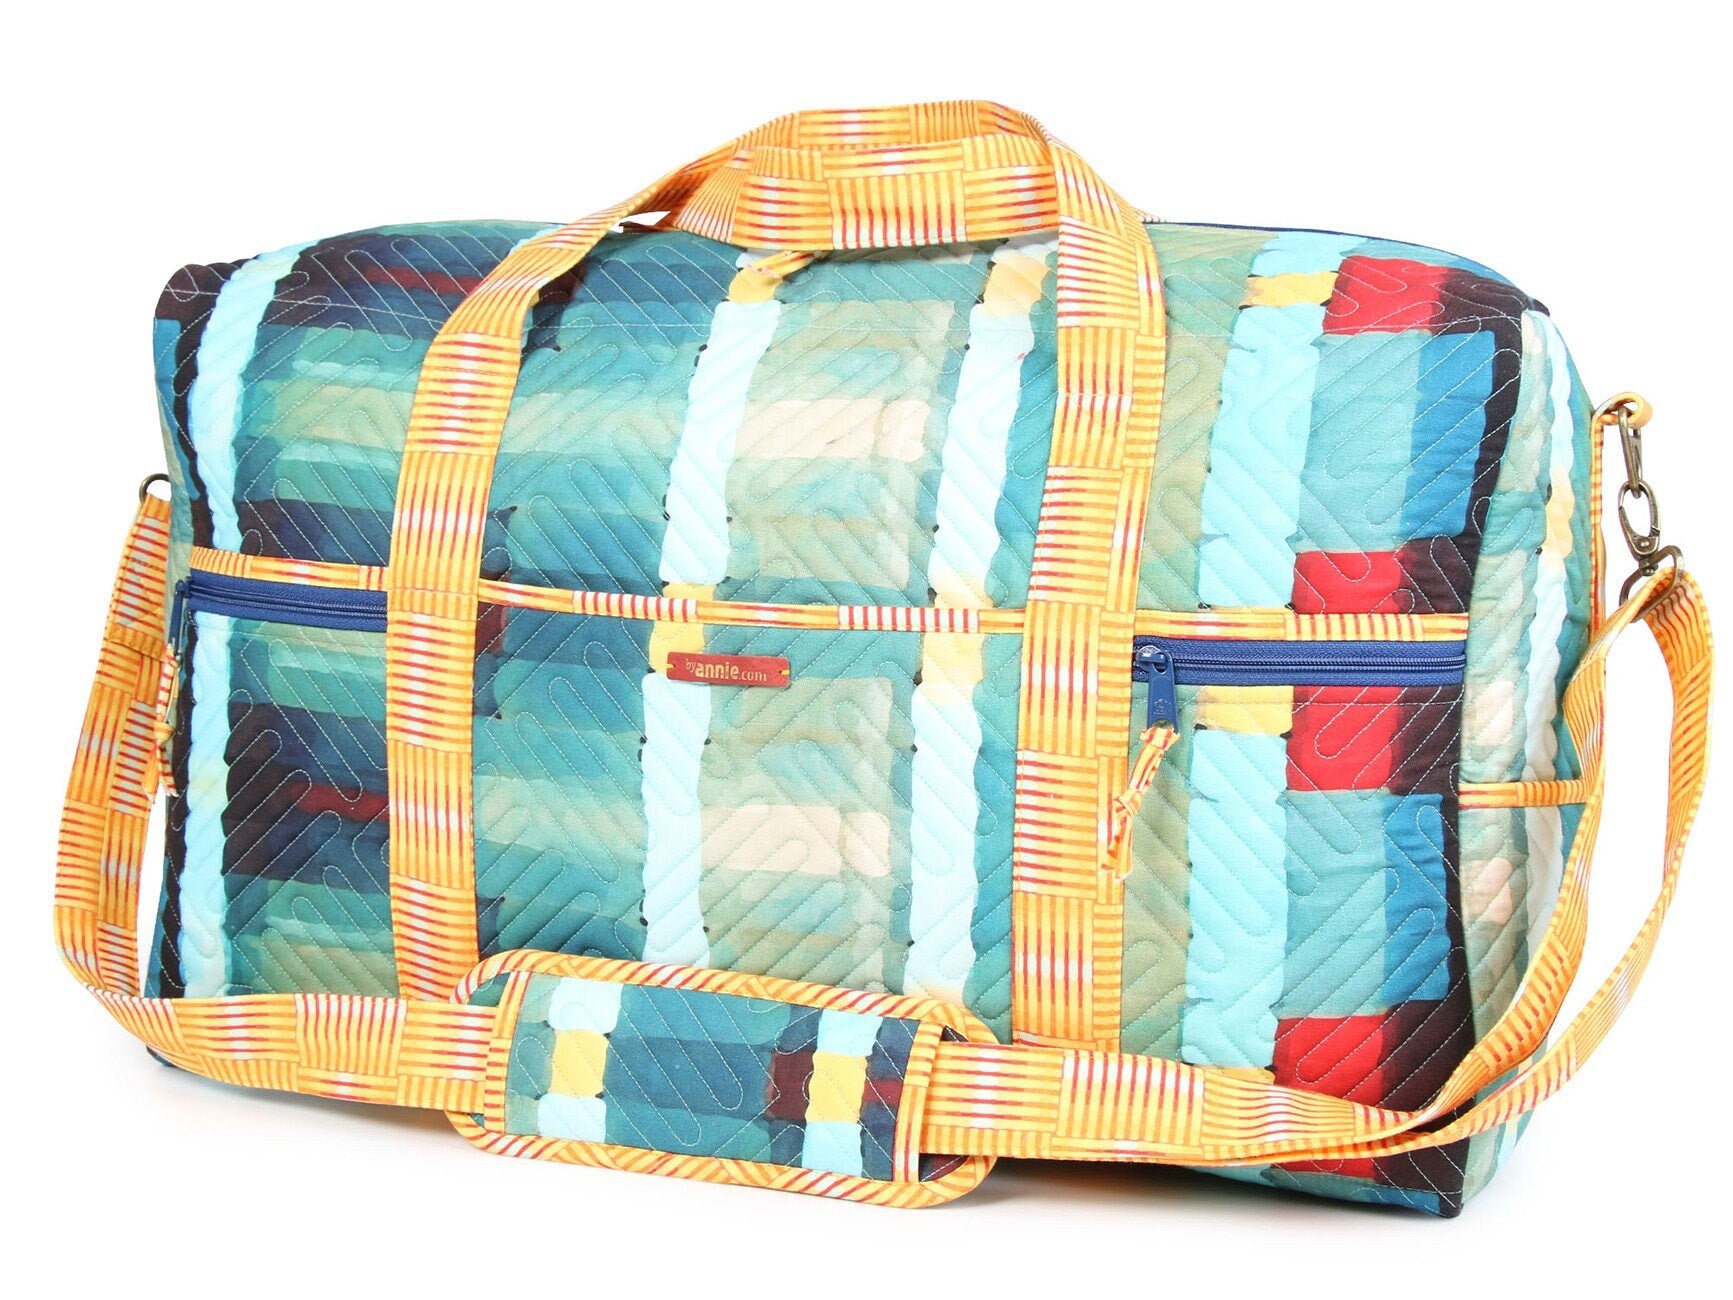 ByAnnie Travel Duffle Bag 2.1 Pattern || Diaper || Strapping || Hardware || Zippers || Soft and Stable